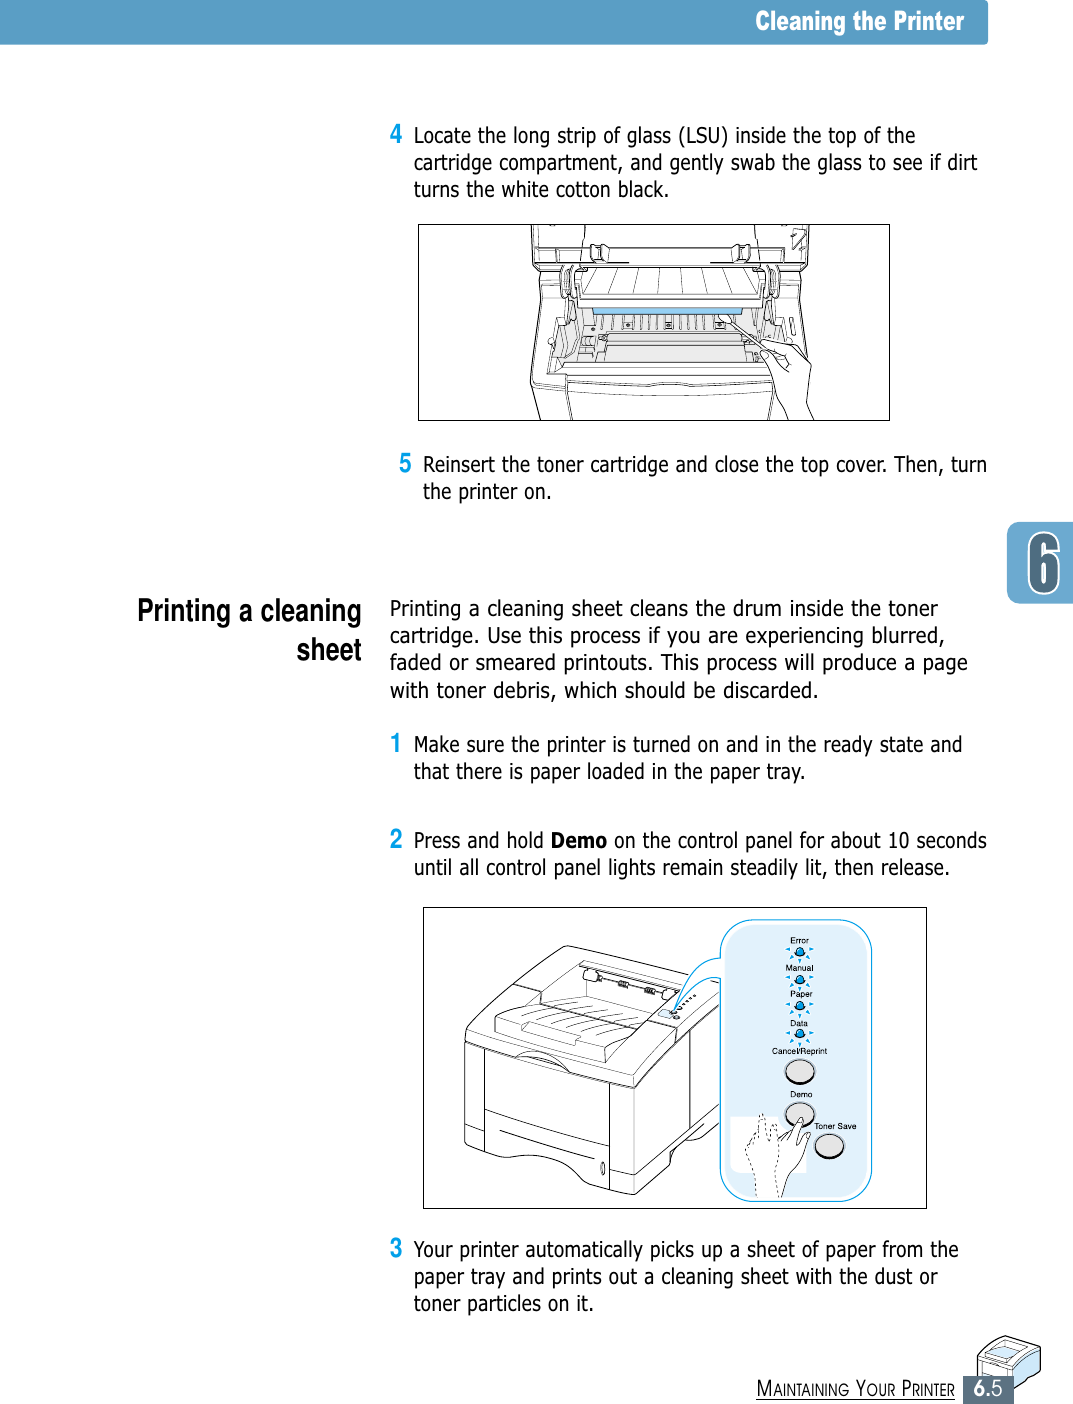 6.5MAINTAINING YOUR PRINTER3Your printer automatically picks up a sheet of paper from thepaper tray and prints out a cleaning sheet with the dust ortoner particles on it.5Reinsert the toner cartridge and close the top cover. Then, turnthe printer on.Cleaning the PrinterPrinting a cleaningsheet Printing a cleaning sheet cleans the drum inside the tonercartridge. Use this process if you are experiencing blurred,faded or smeared printouts. This process will produce a pagewith toner debris, which should be discarded.1Make sure the printer is turned on and in the ready state andthat there is paper loaded in the paper tray.2Press and hold Demo on the control panel for about 10 secondsuntil all control panel lights remain steadily lit, then release.4Locate the long strip of glass (LSU) inside the top of thecartridge compartment, and gently swab the glass to see if dirtturns the white cotton black.